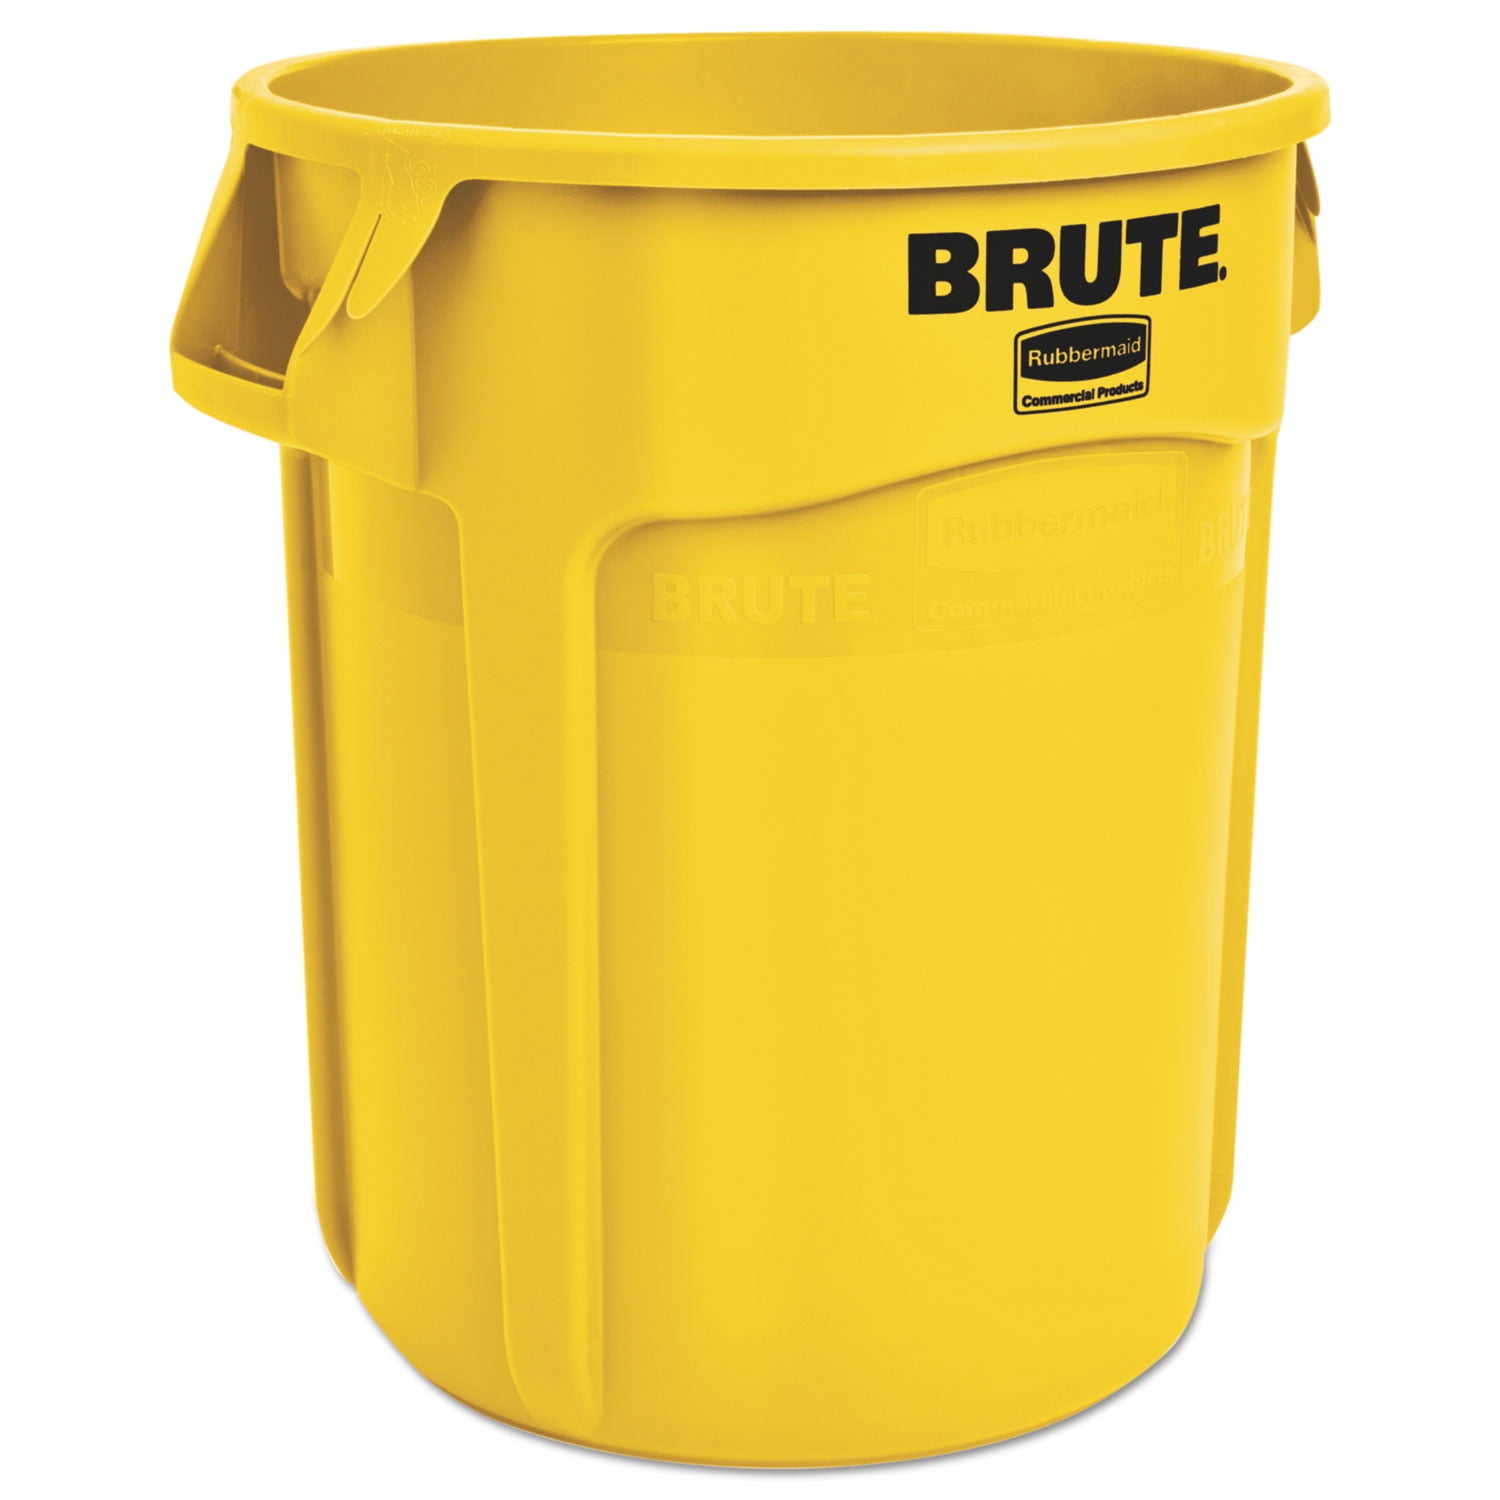 Rubbermaid 2620 Brute 20 Gallon Vented Trash Can RCP 2620 WHI White 